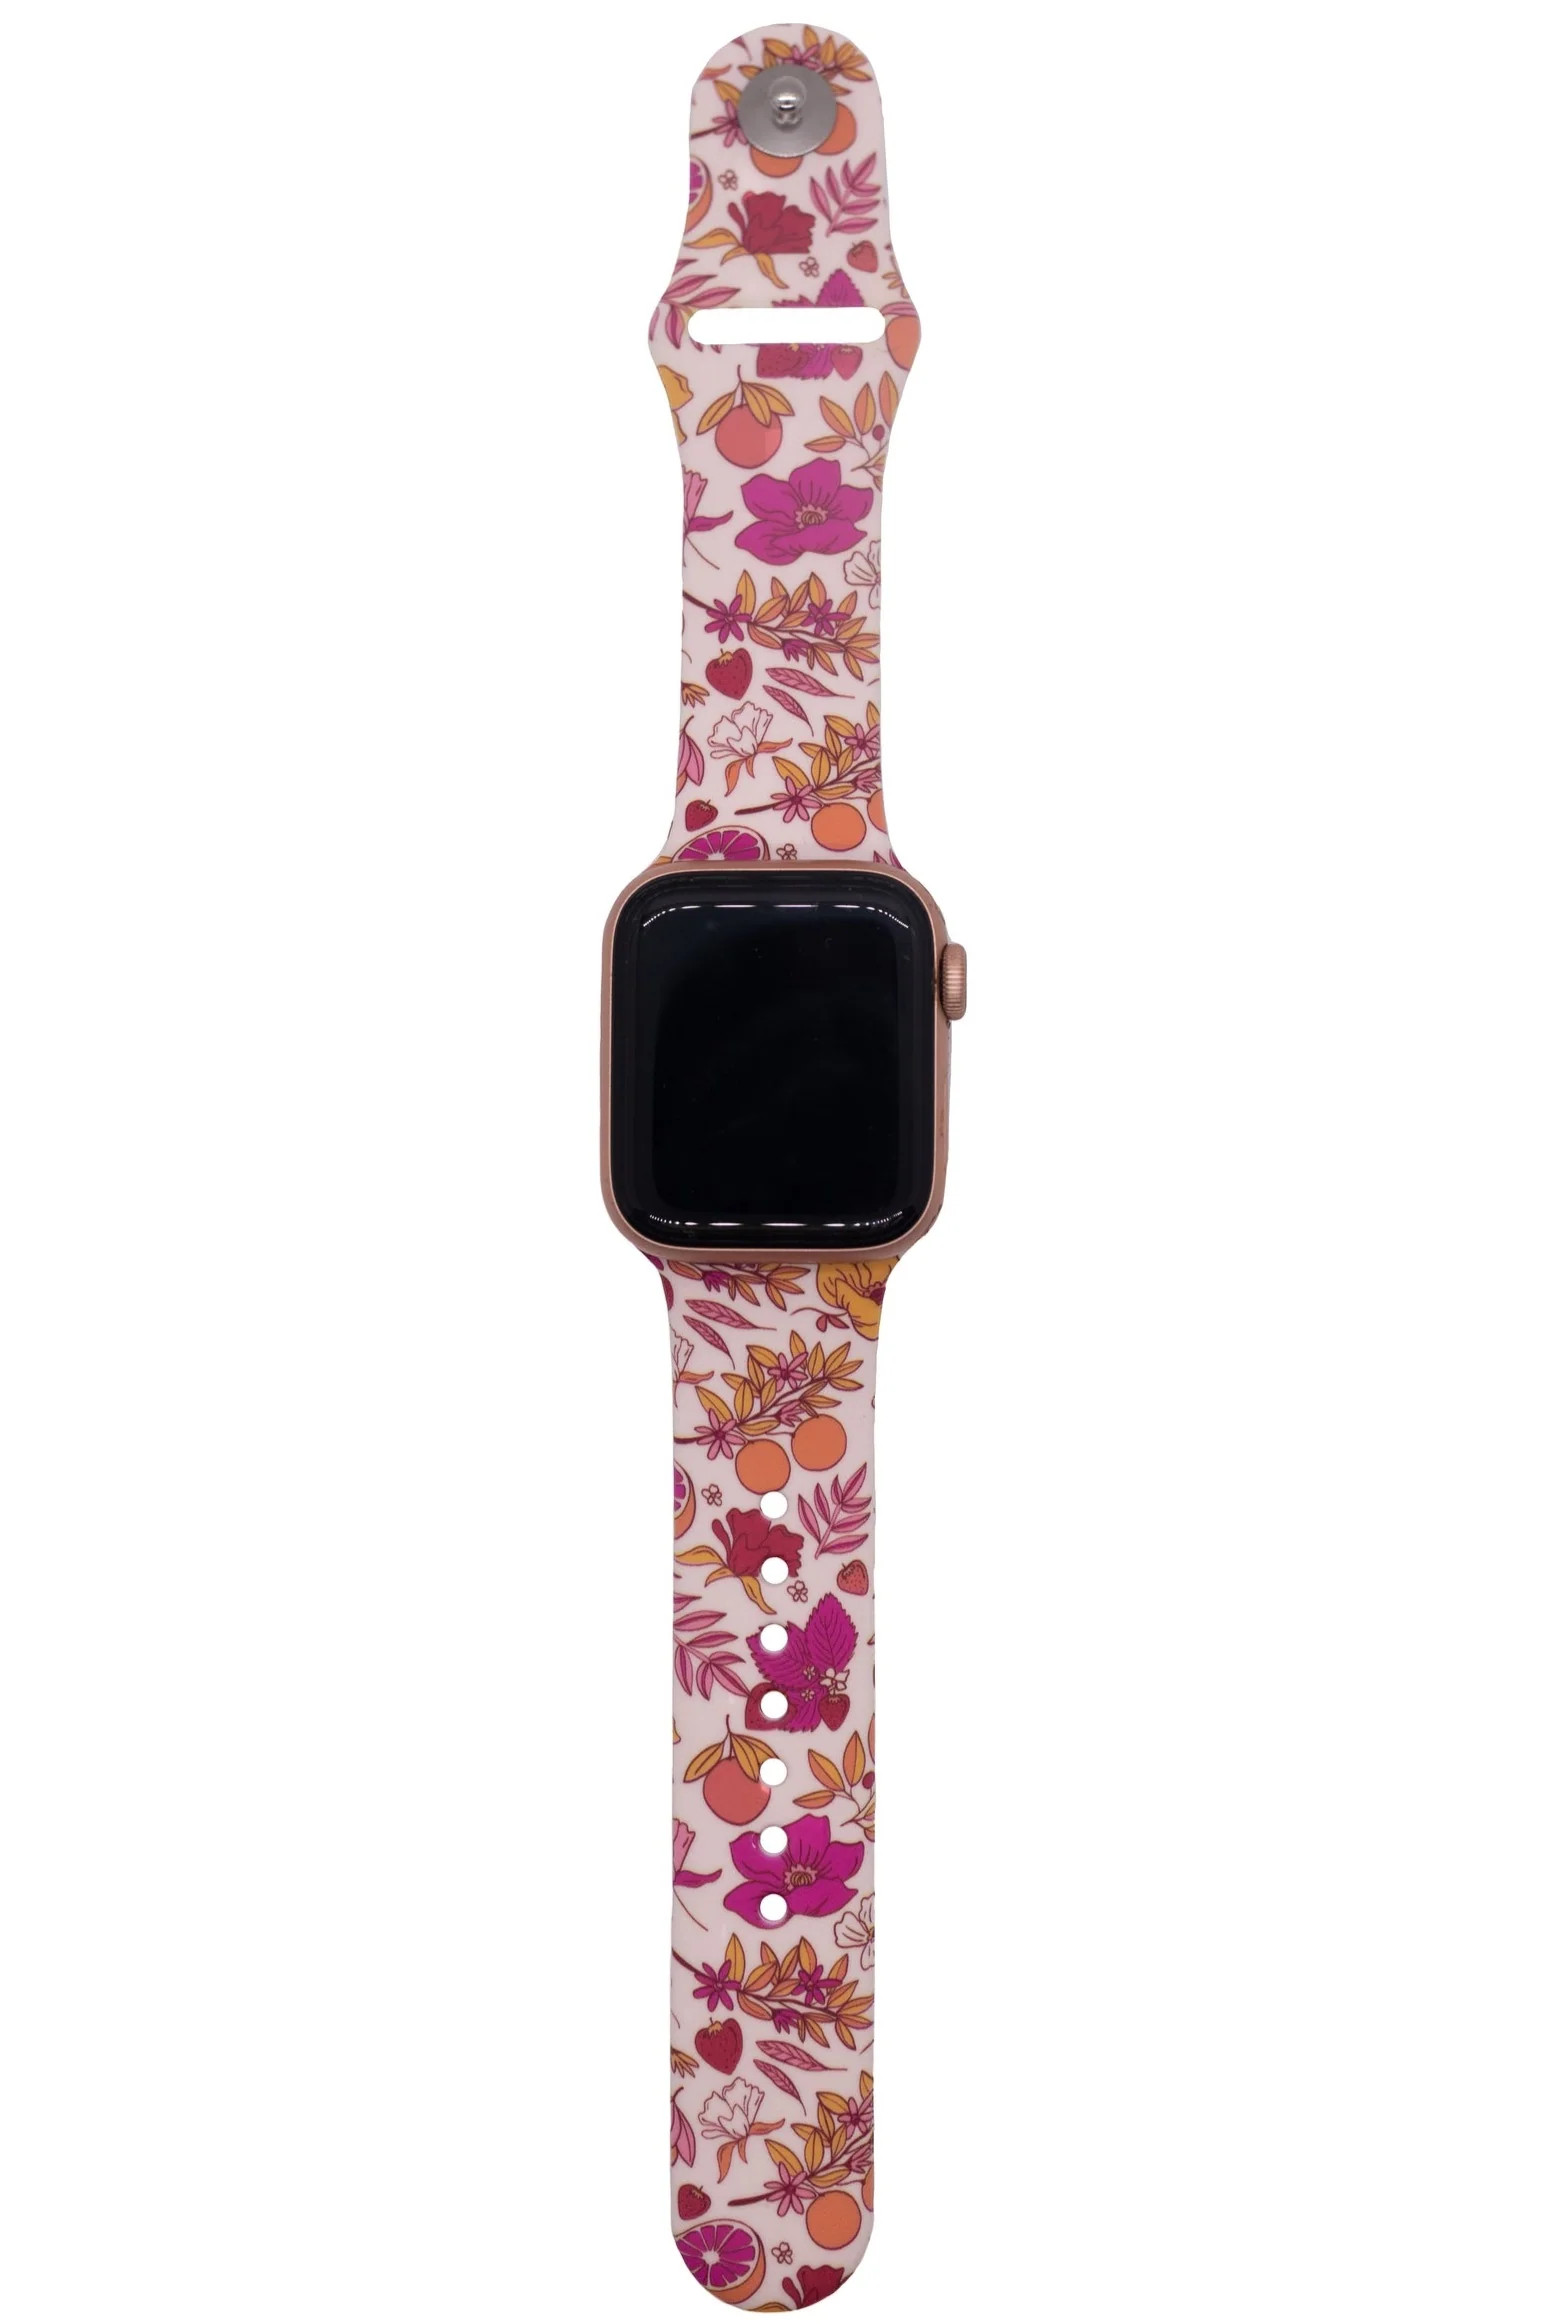 Tropical Floral - Apple Watch Band | Walli Cases